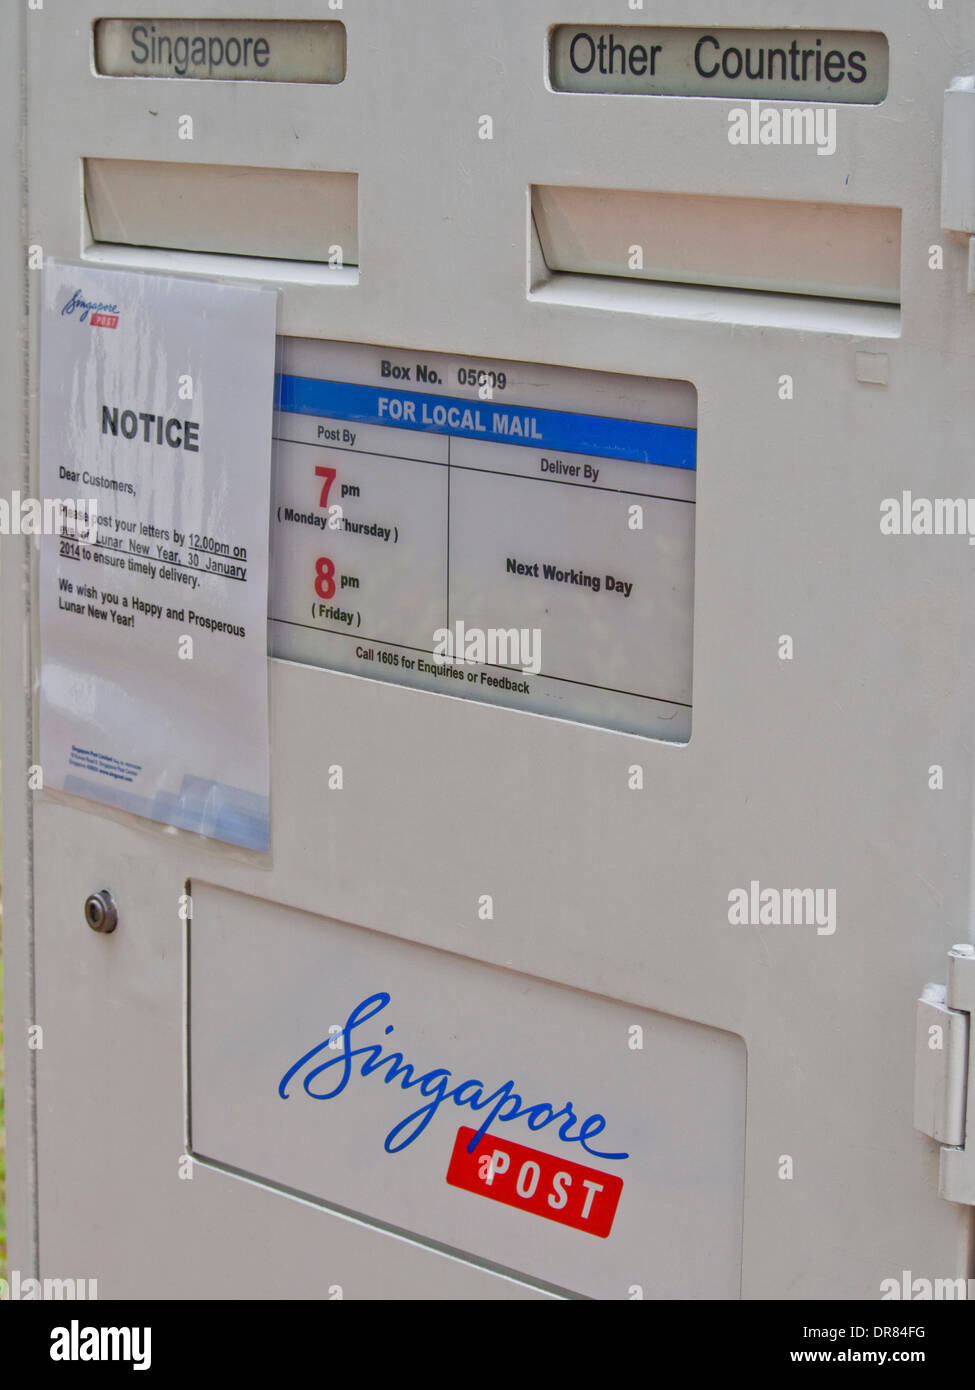 Post office box in Chinatown, Singapore Stock Photo - Alamy